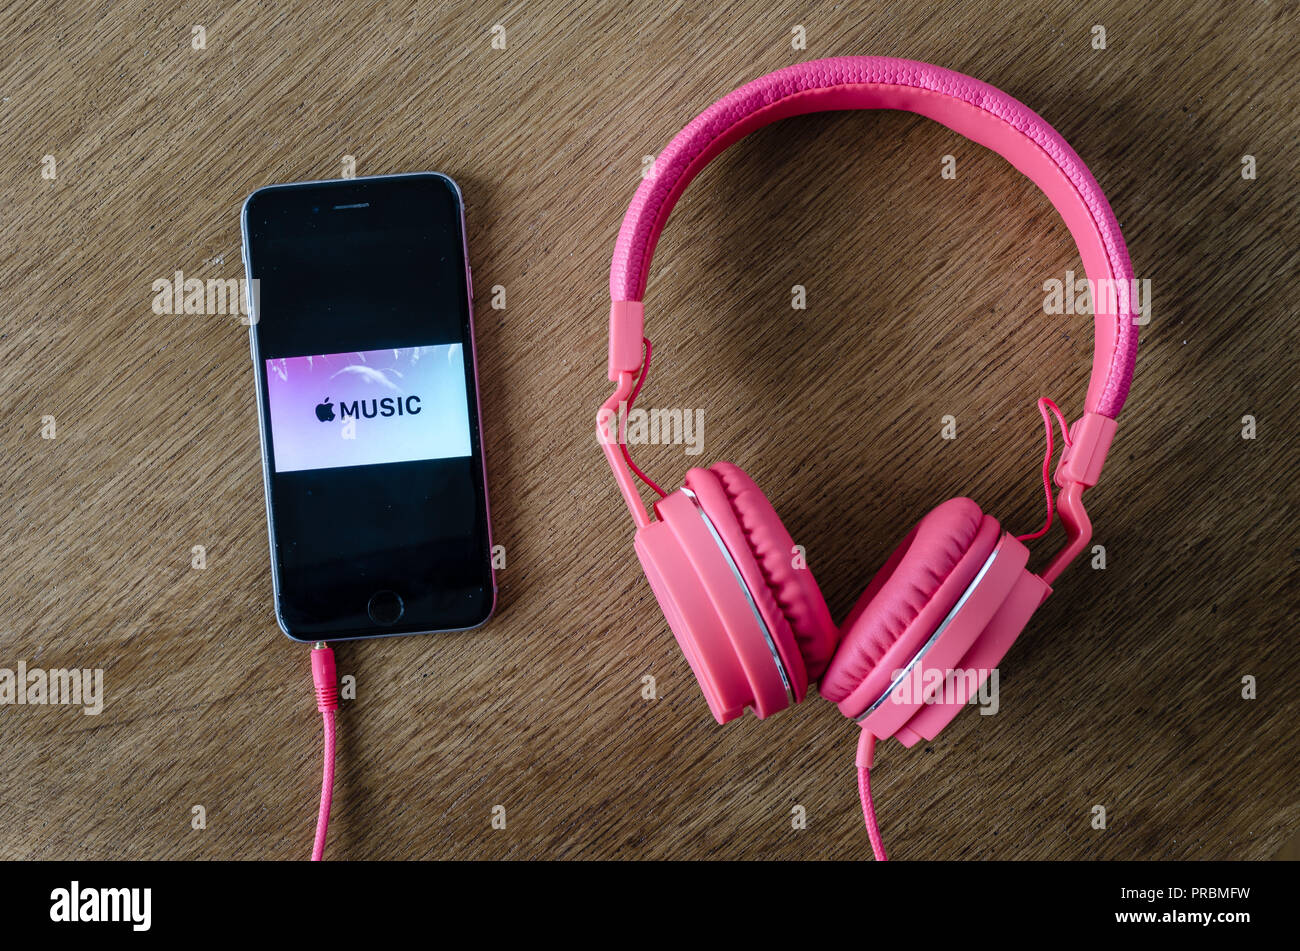 Groningen, Holland. September 29, 2018: Iphone 6 with logo of apple music and a pink headphone Stock Photo